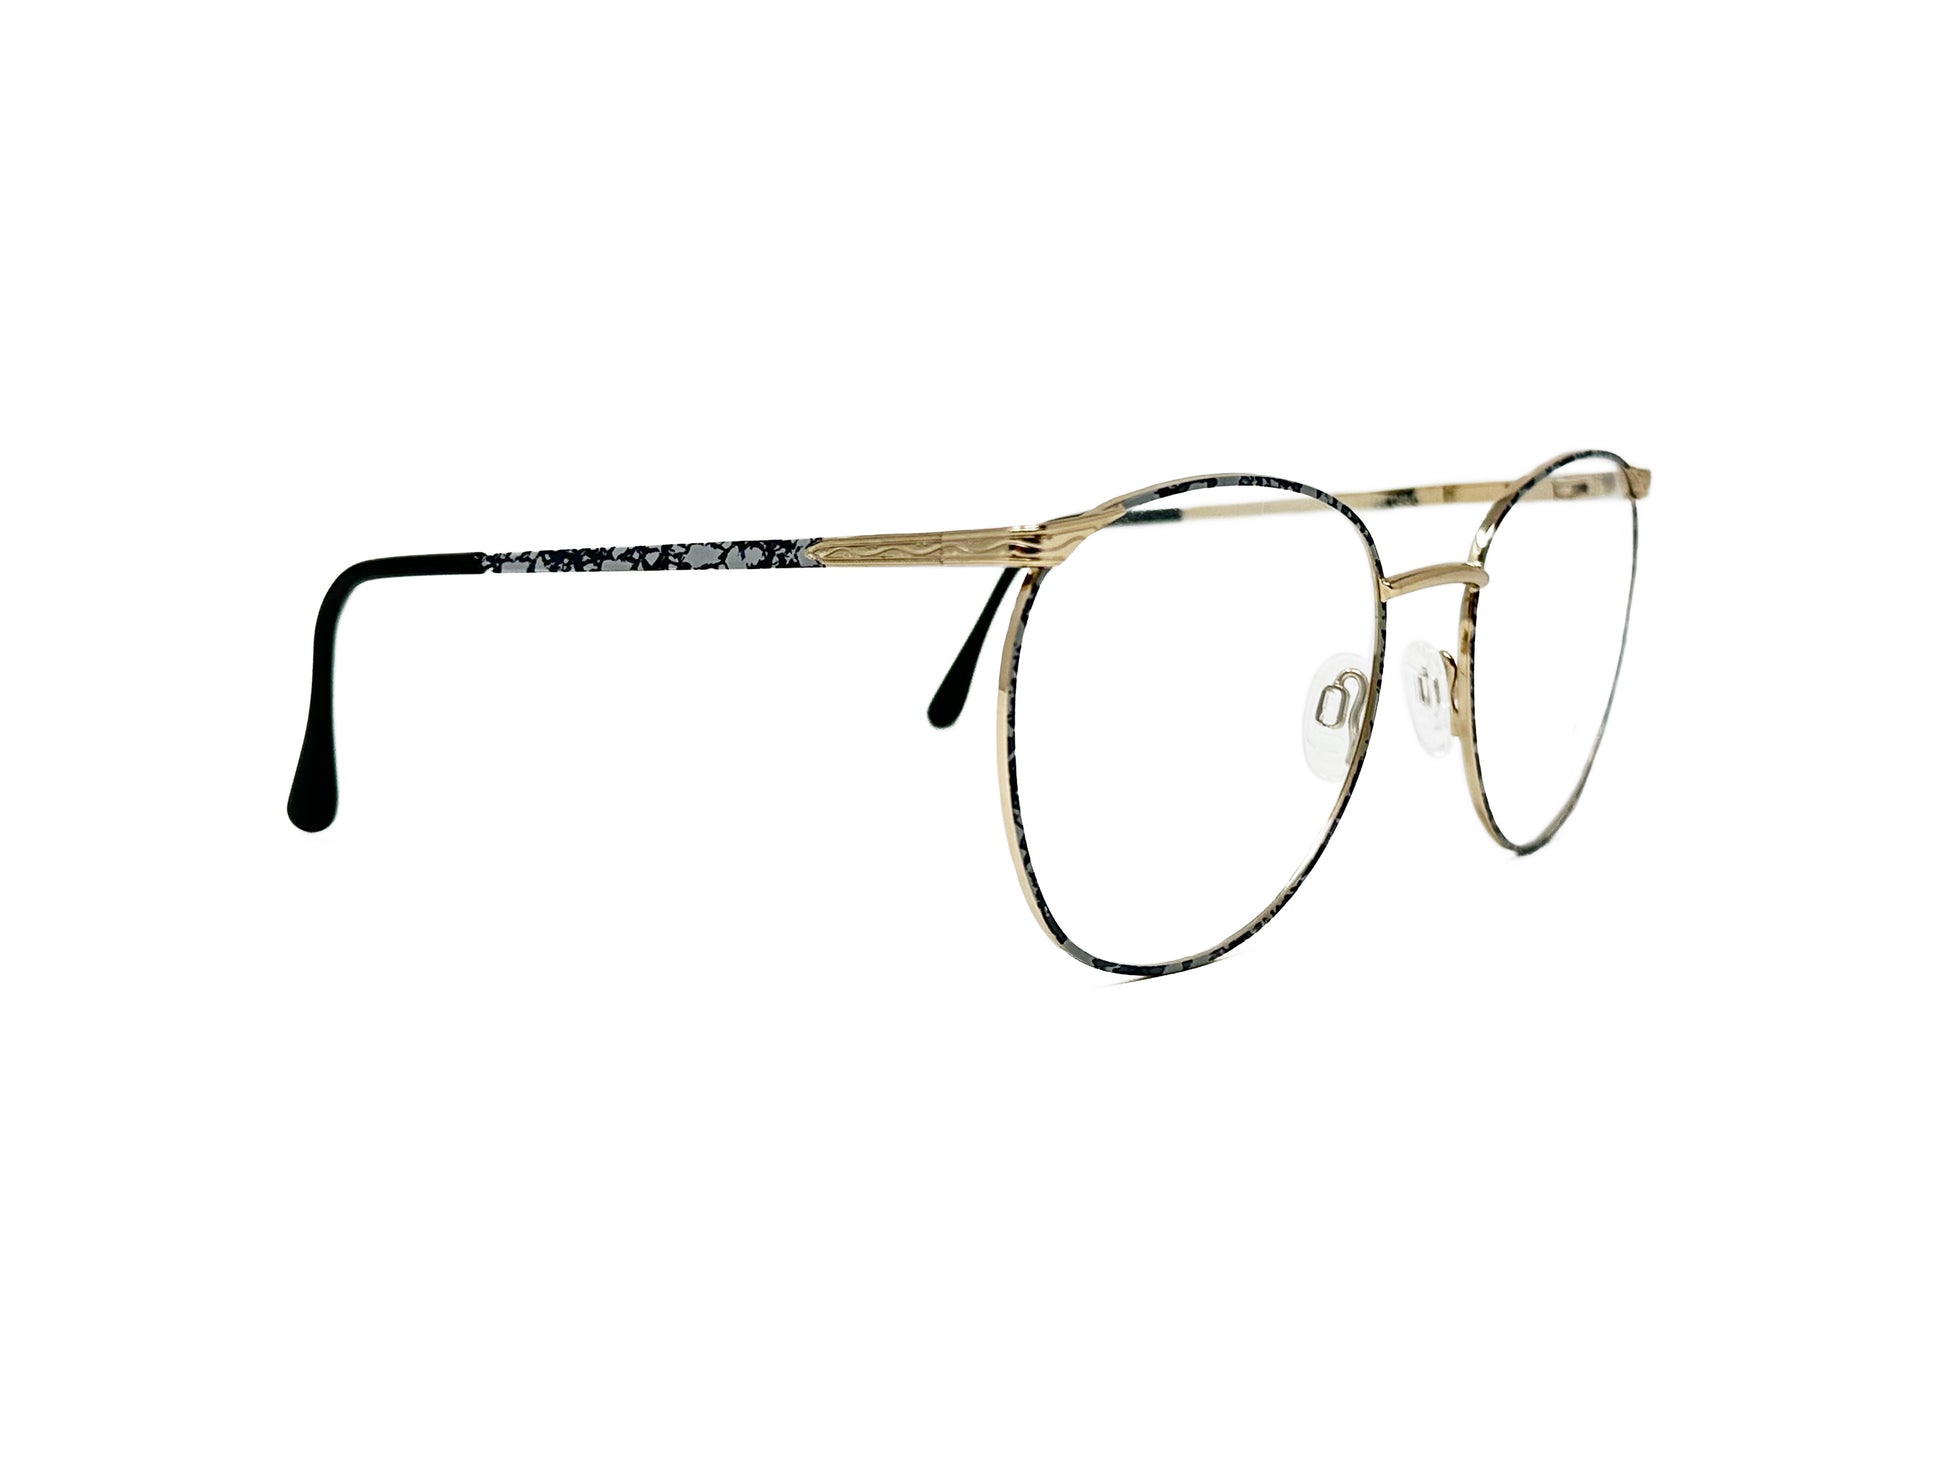 Cadore Moda squared-round, metal optical frame. Model: Boca. Color: Demi Gray, with gold metal. Side view.